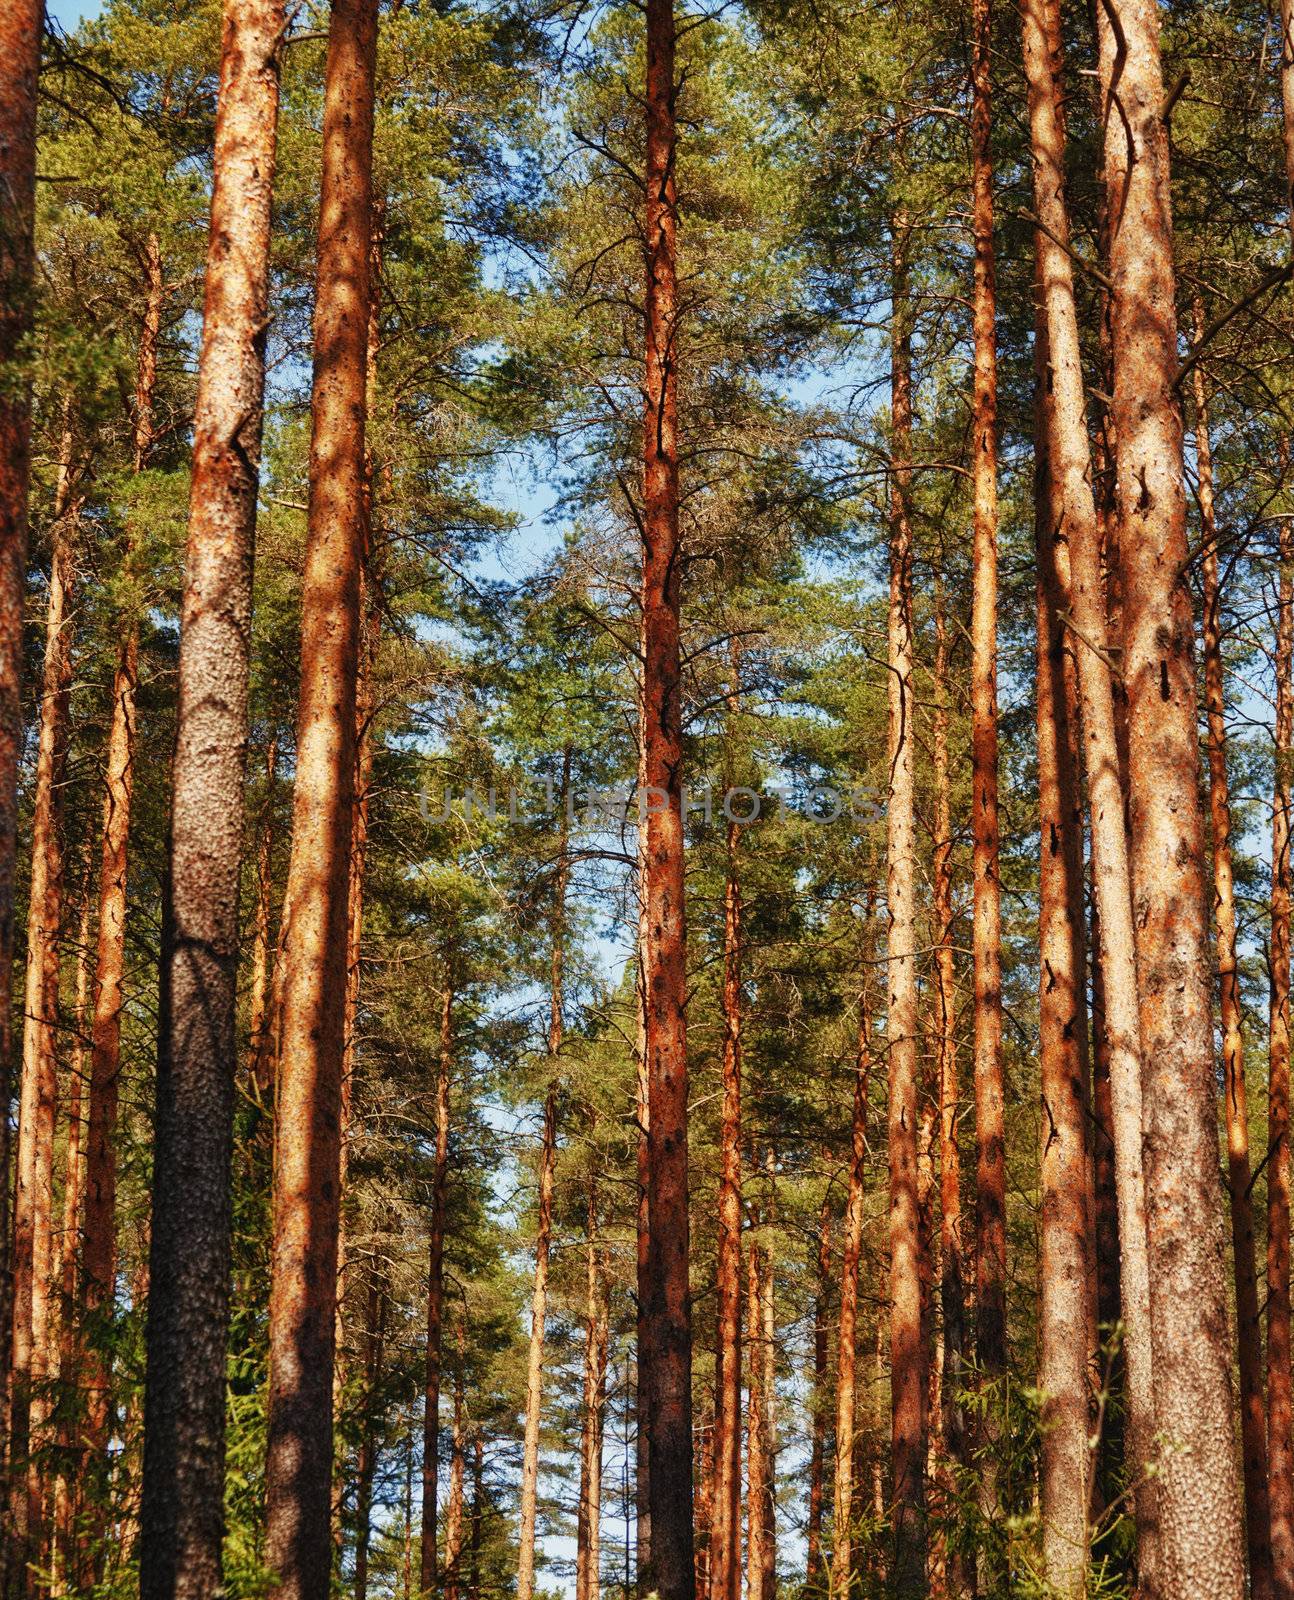 Pine Tree Forest by petr_malyshev